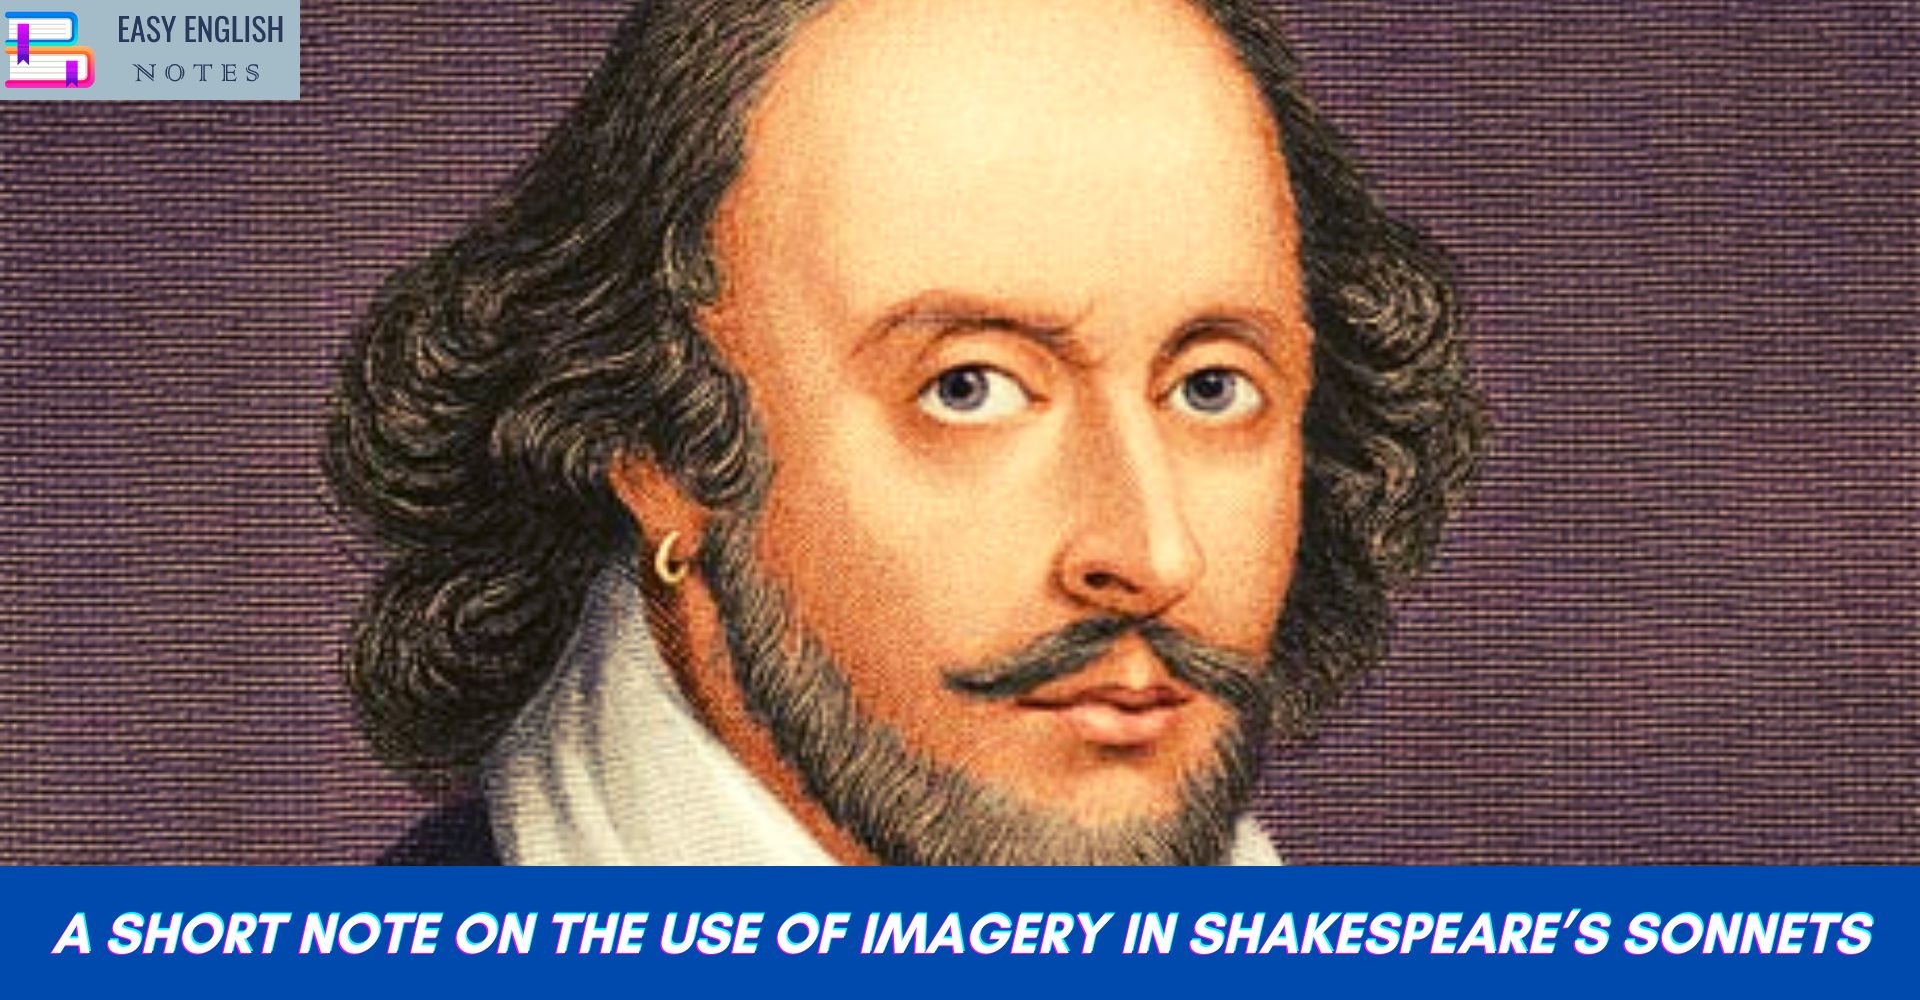 A Short Note On The Use Of Imagery In Shakespeare’s Sonnets